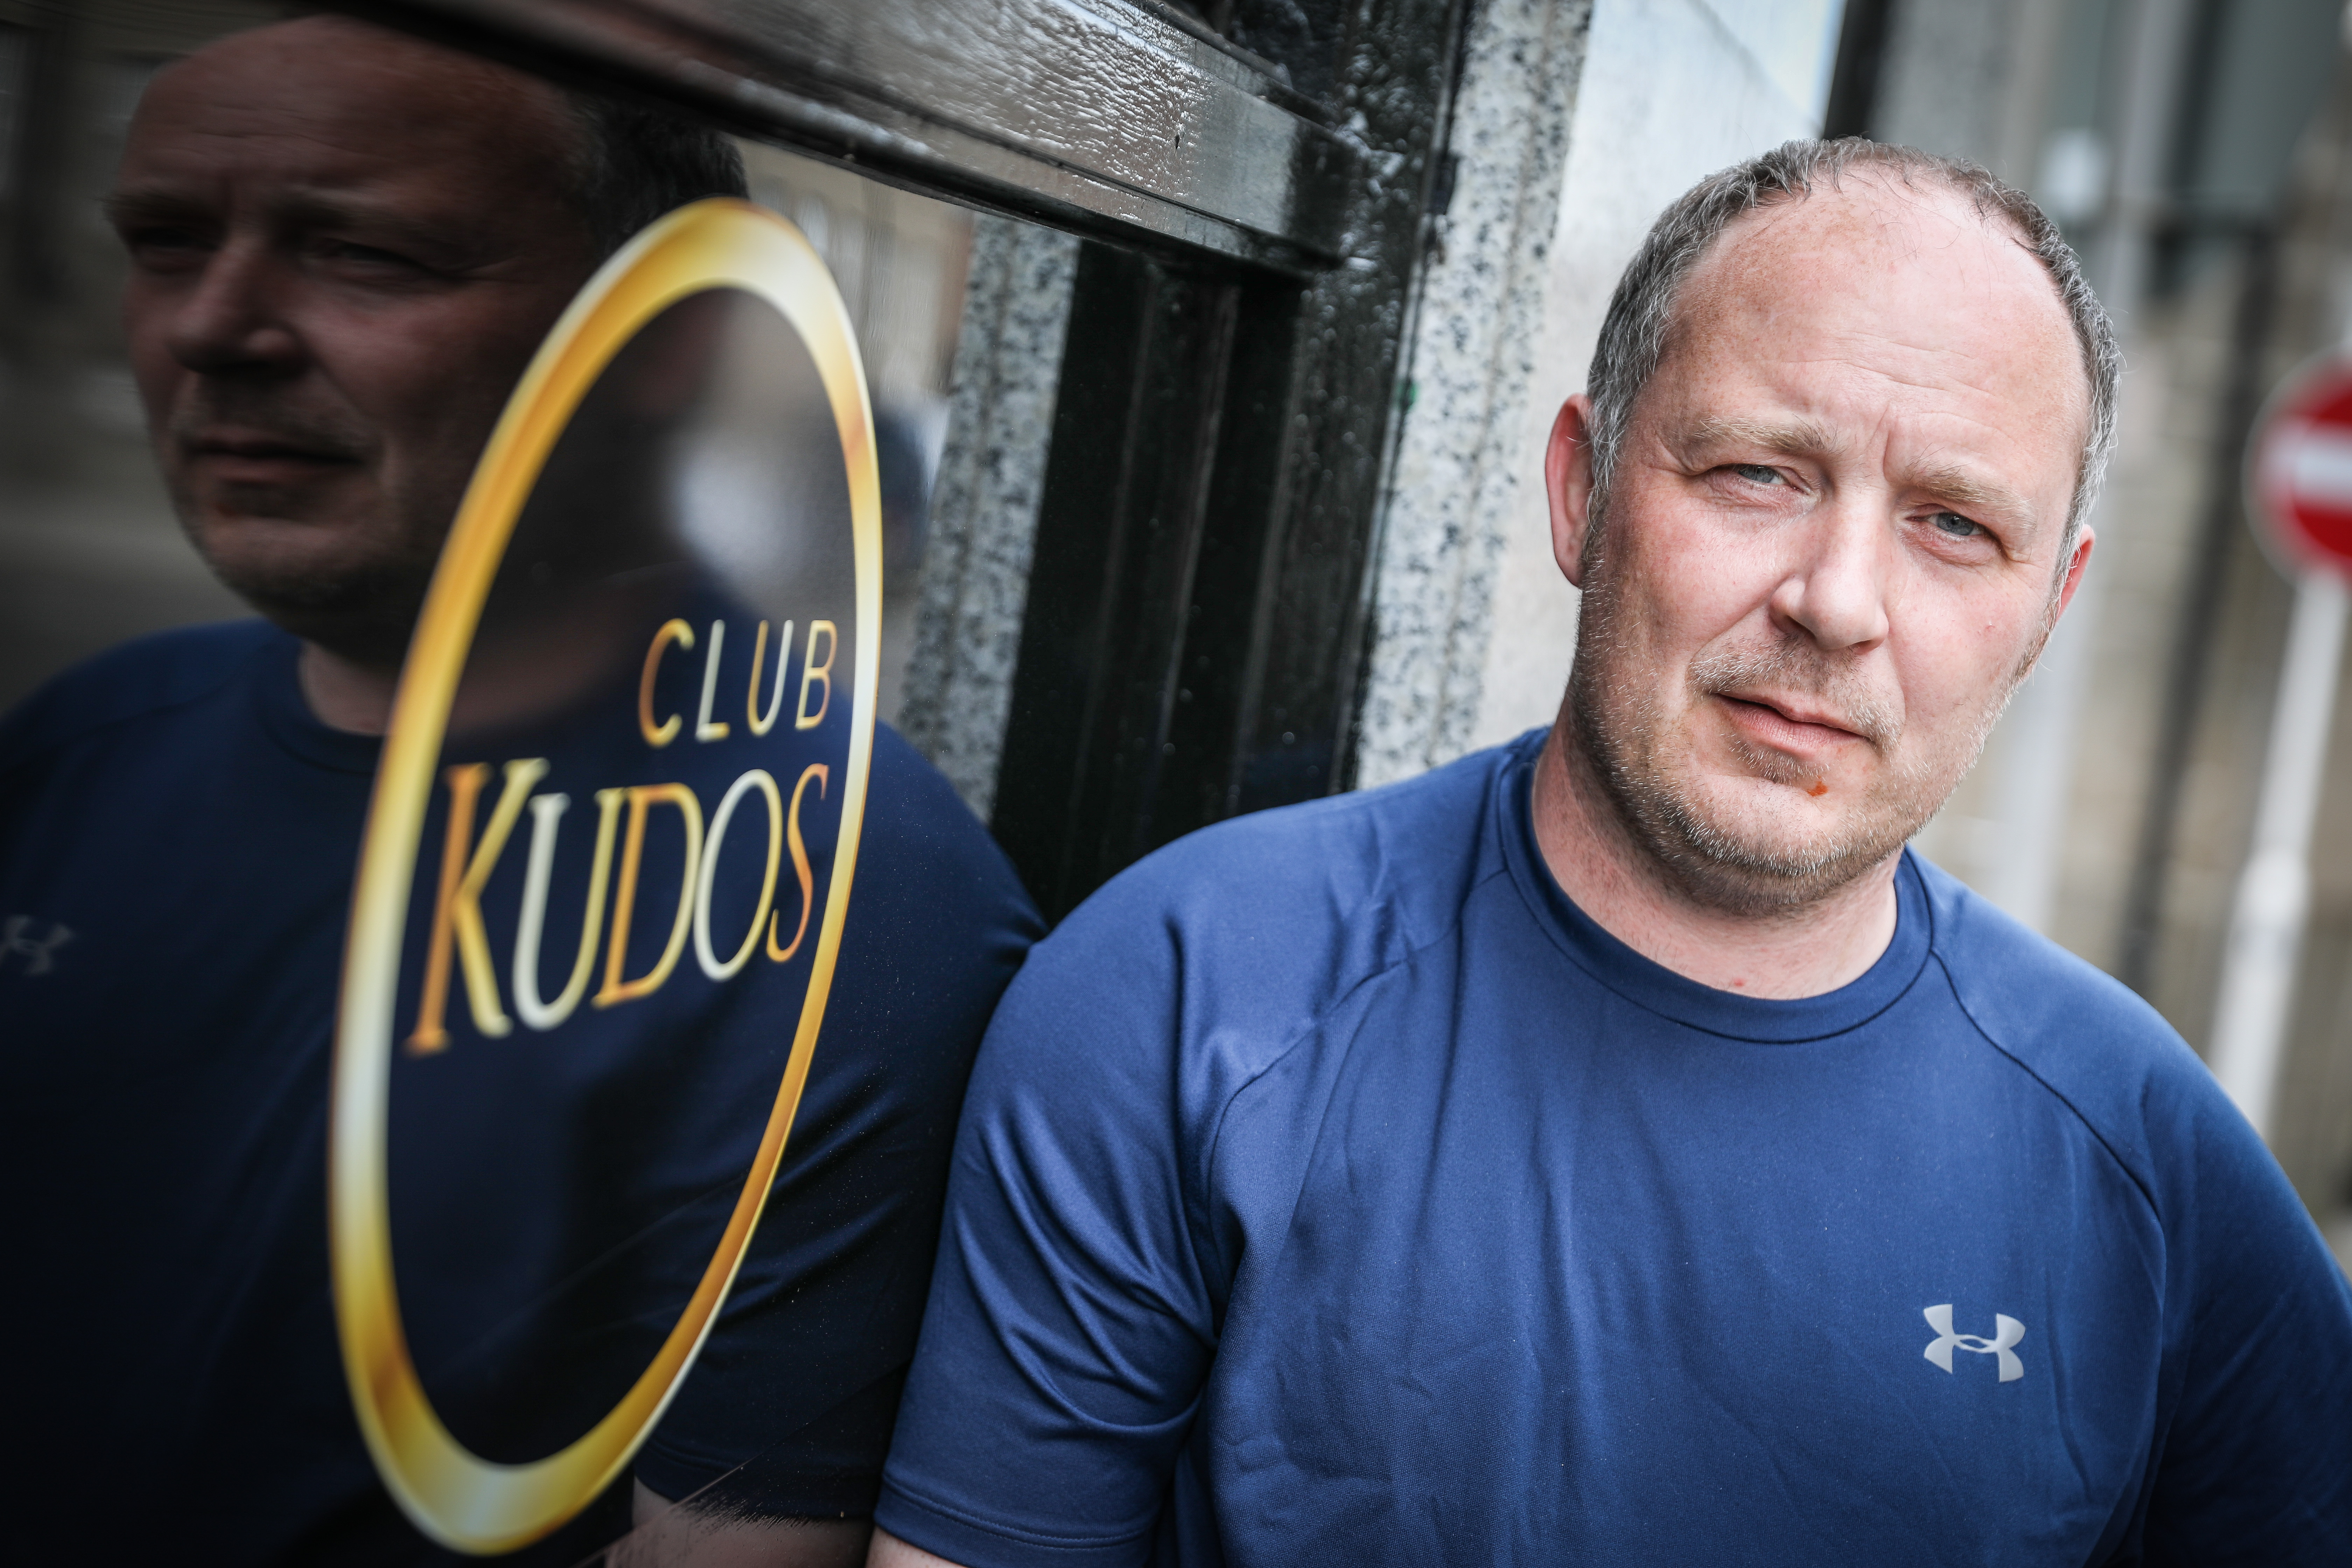 Scottish Government probing funding into Dundee sex club